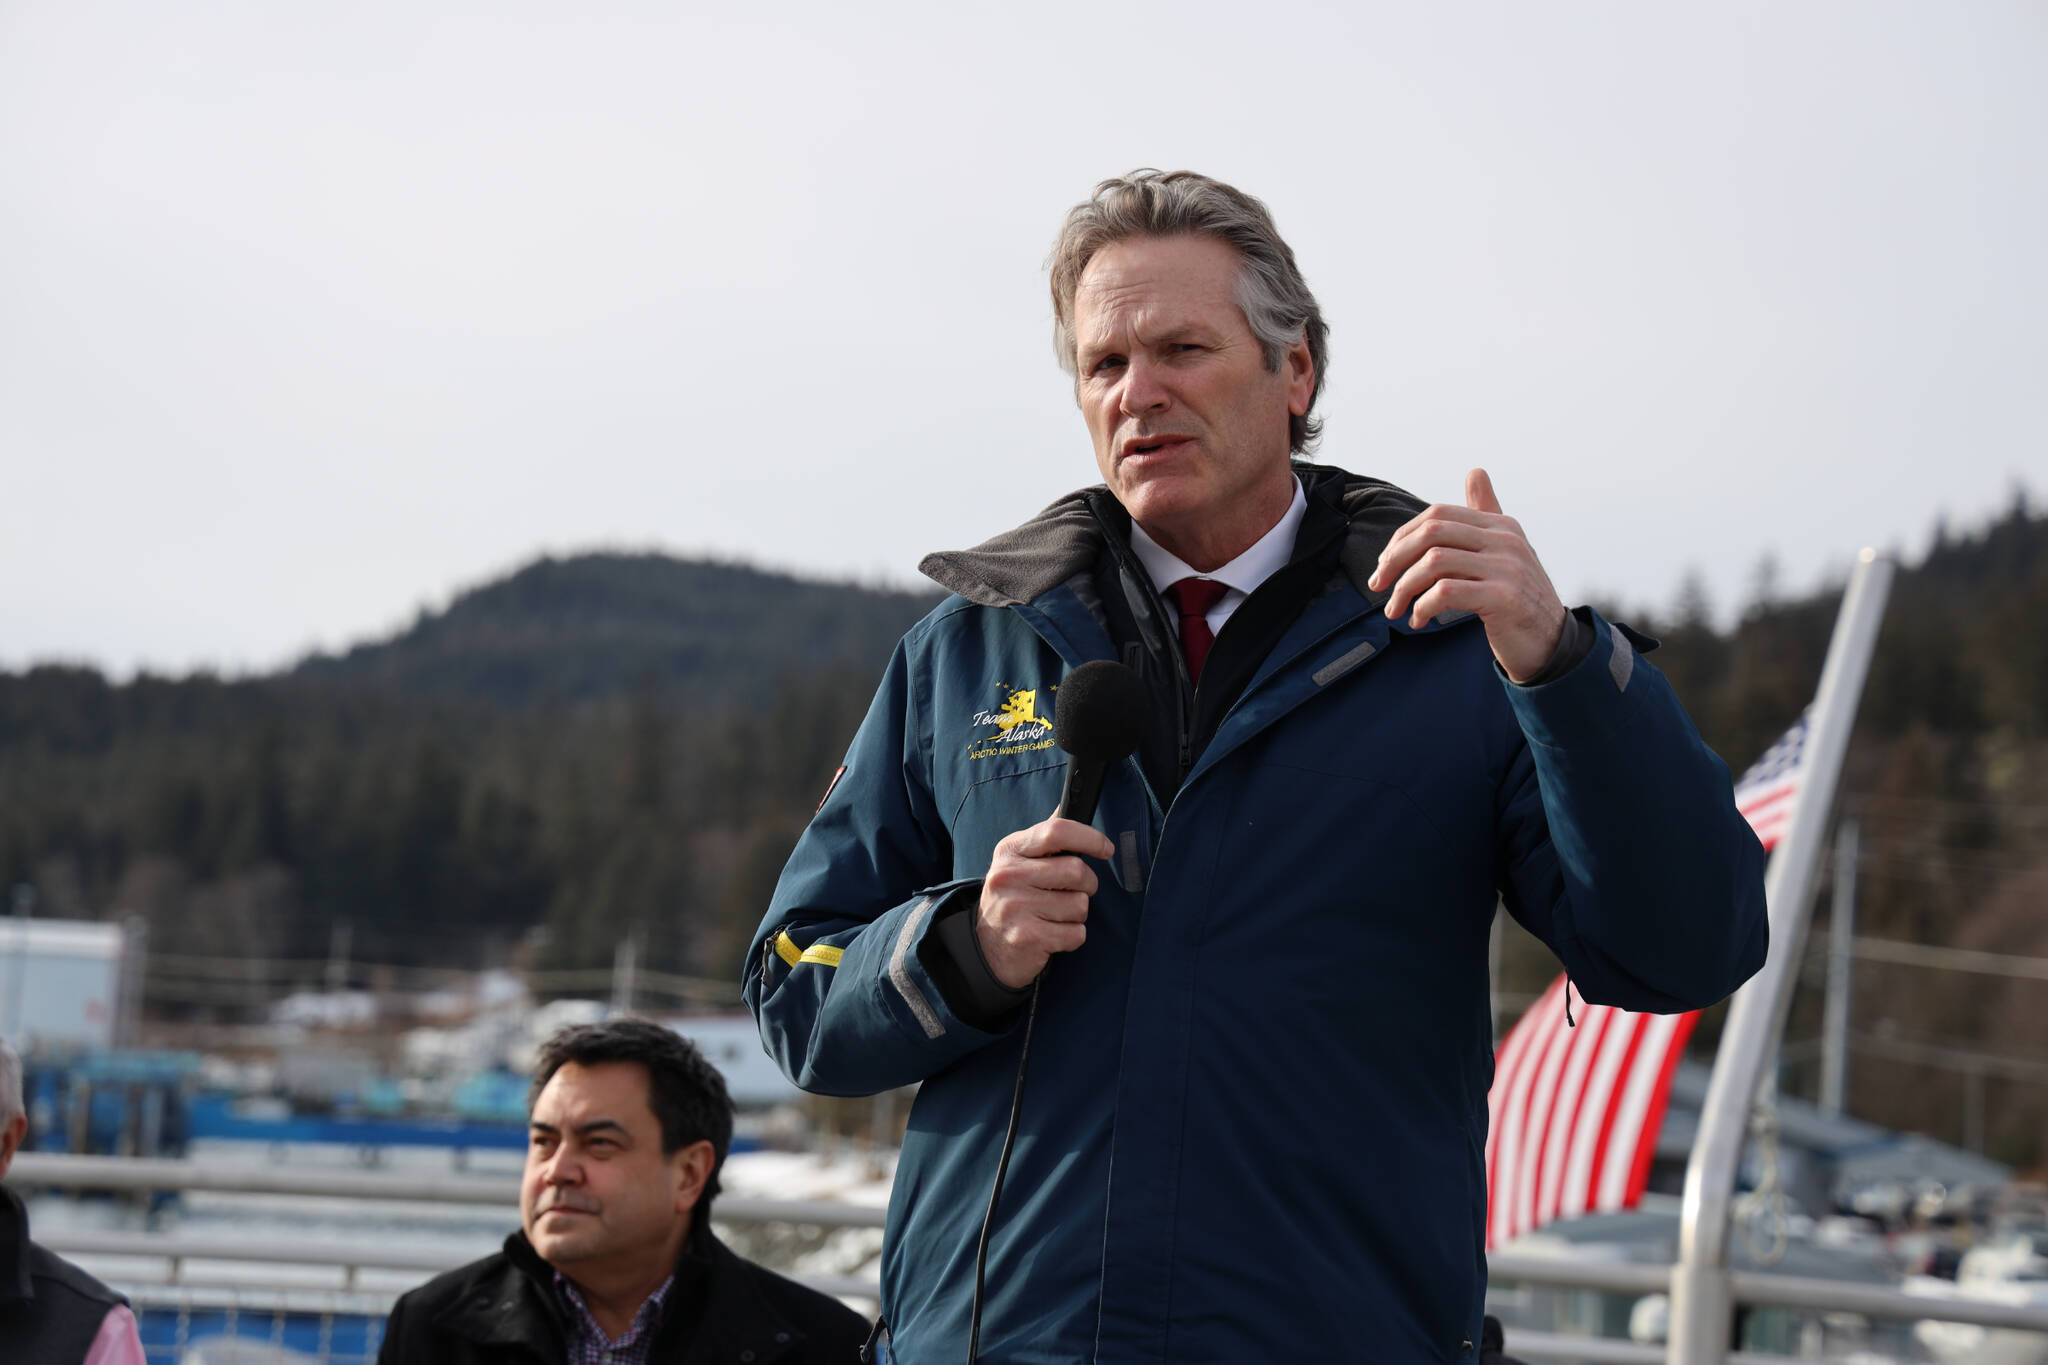 Gov. Mike Dunleavy speaks Thursday afternoon in support of an agreement between the Alaska Department of Transportation and Public Facilities and Goldbelt Inc. to pursue engineering and design services to determine whether it’s feasible to build a new ferry terminal facility in Juneau at Cascade Point. (Clarise Larson / Juneau Empire)